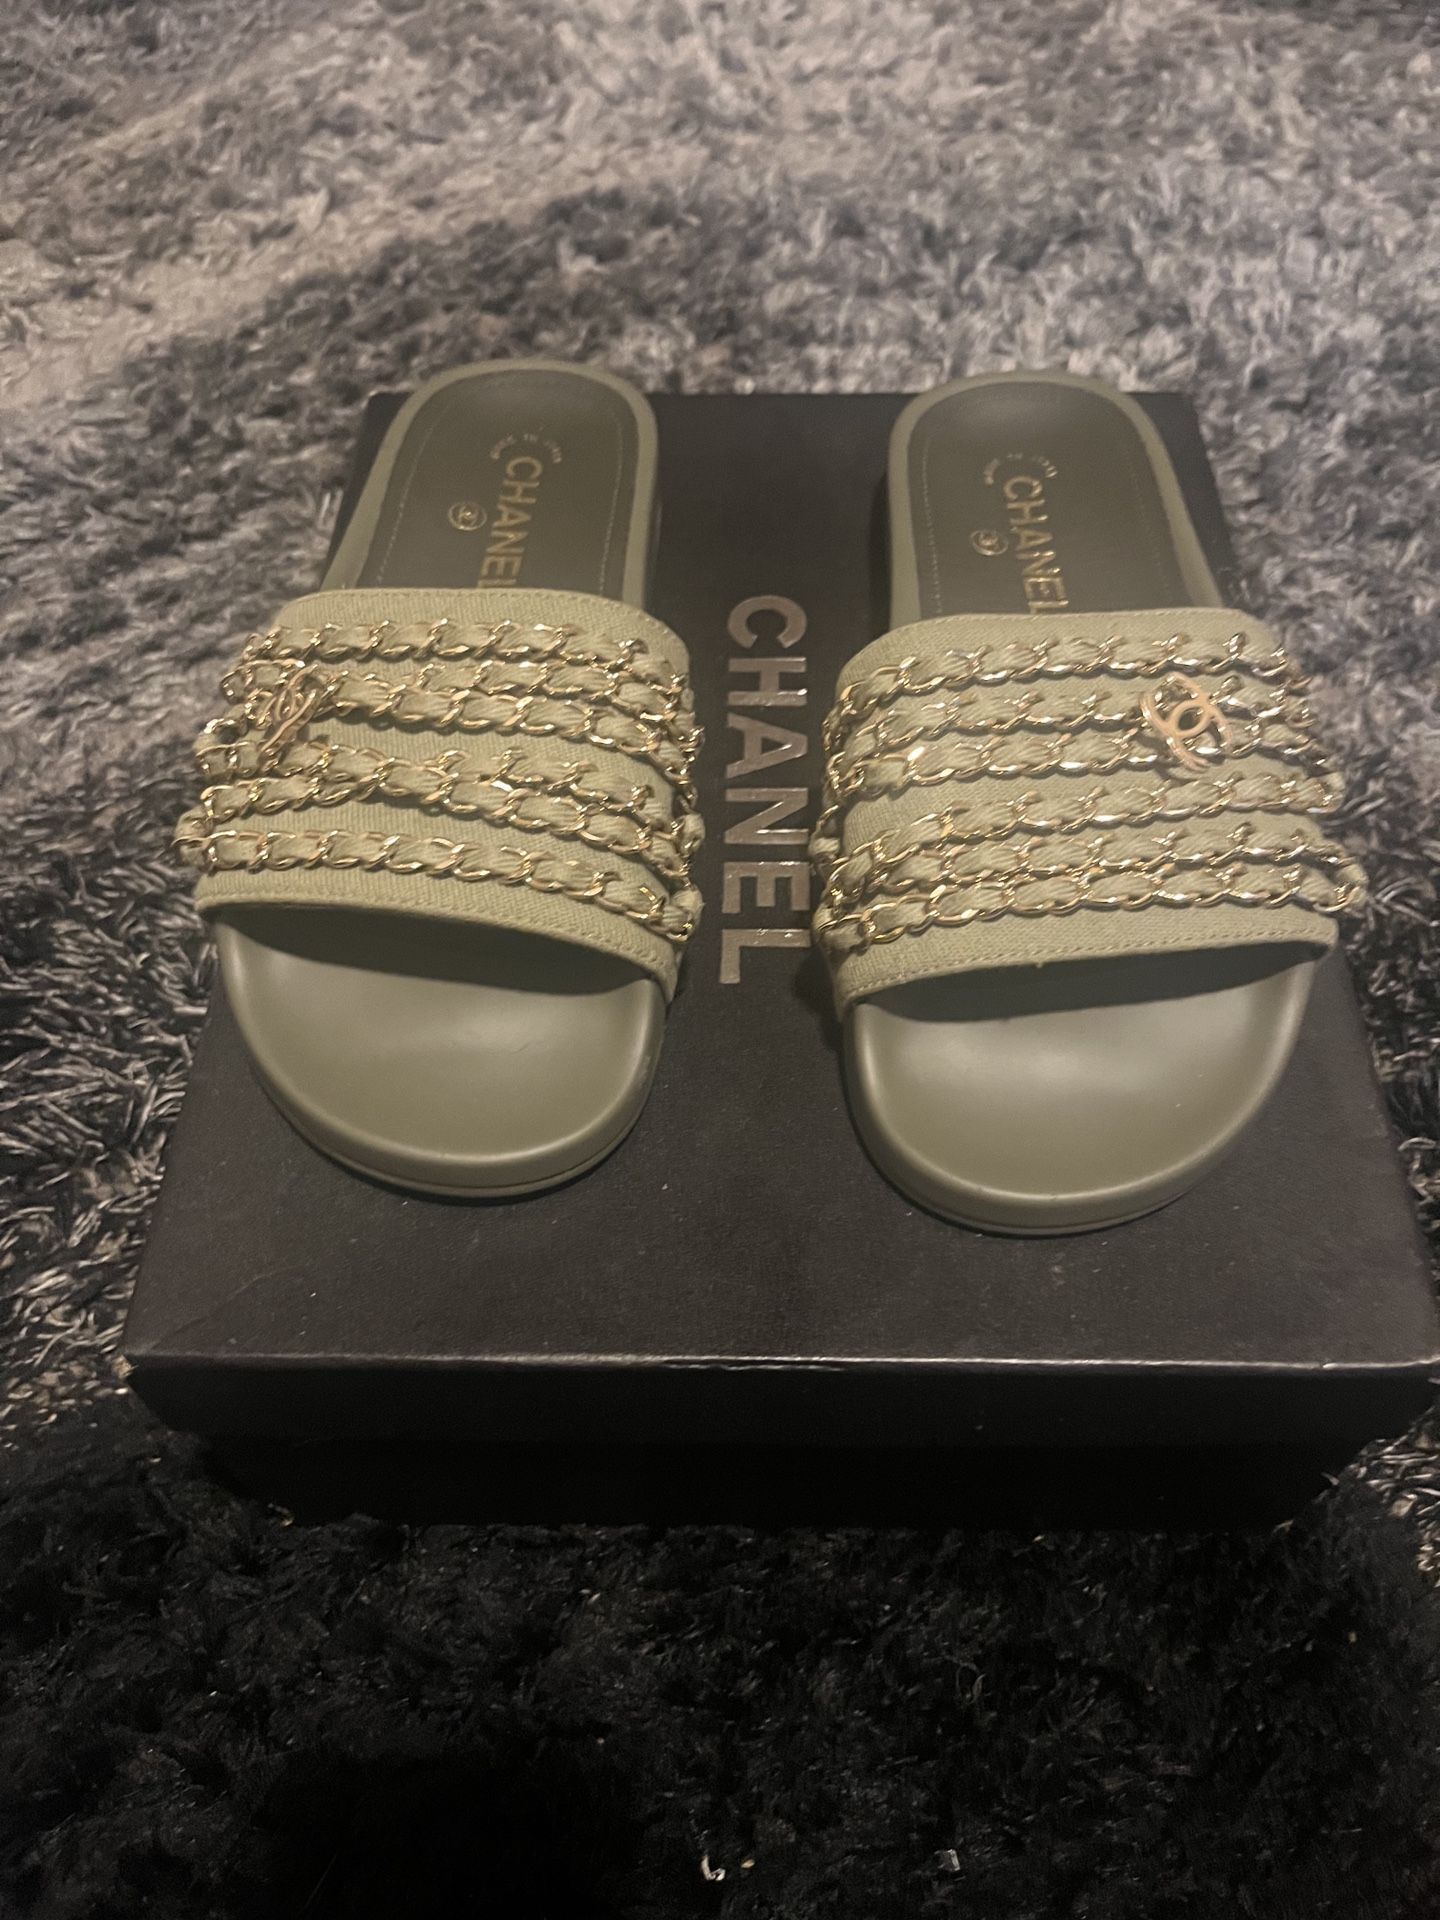 Chanel Slides for Sale in The Bronx, NY - OfferUp